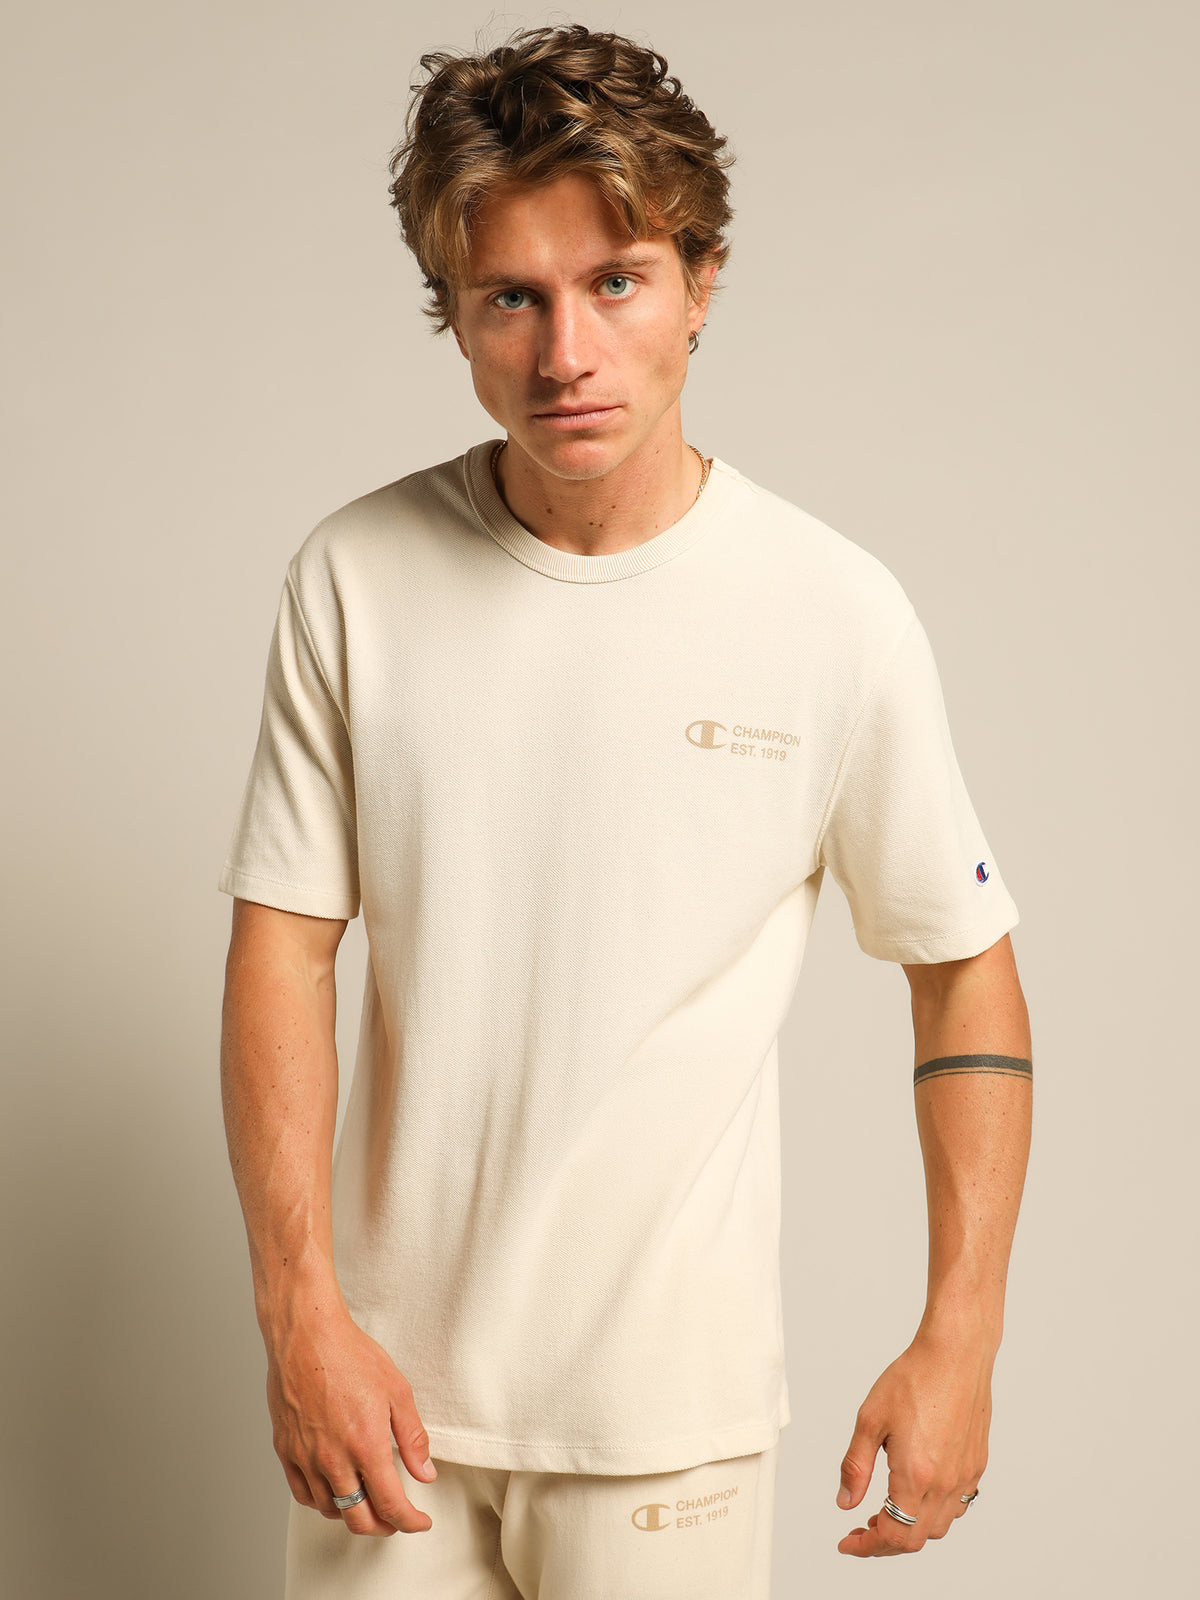 Re:bound Pique T-Shirt in Natural